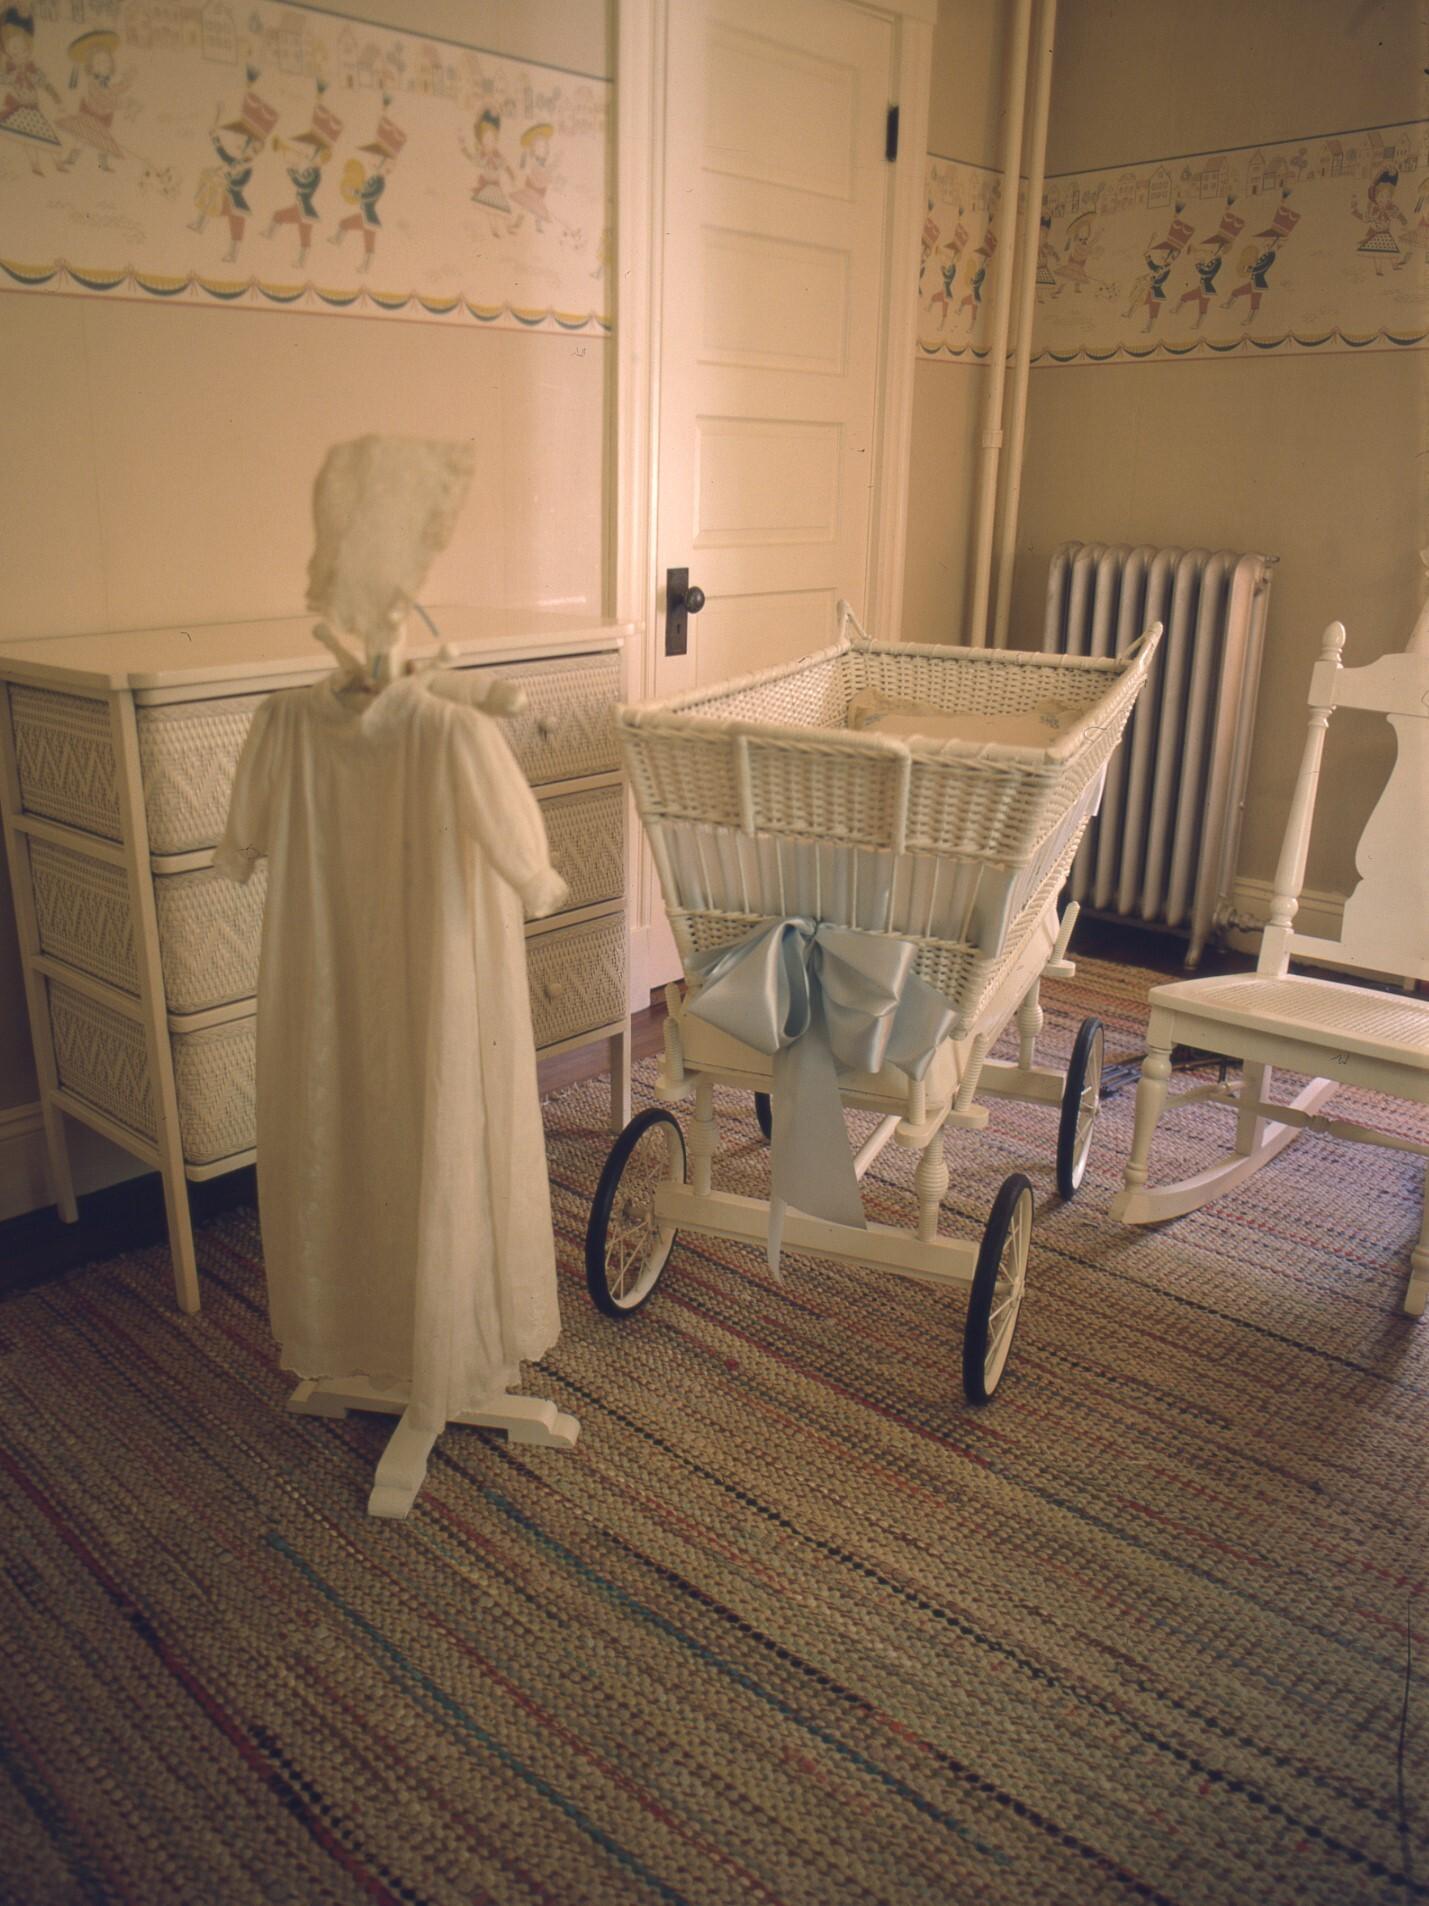 Room with white wicker furniture, including bassinet and rocking chair. Long white baby dress hangs.